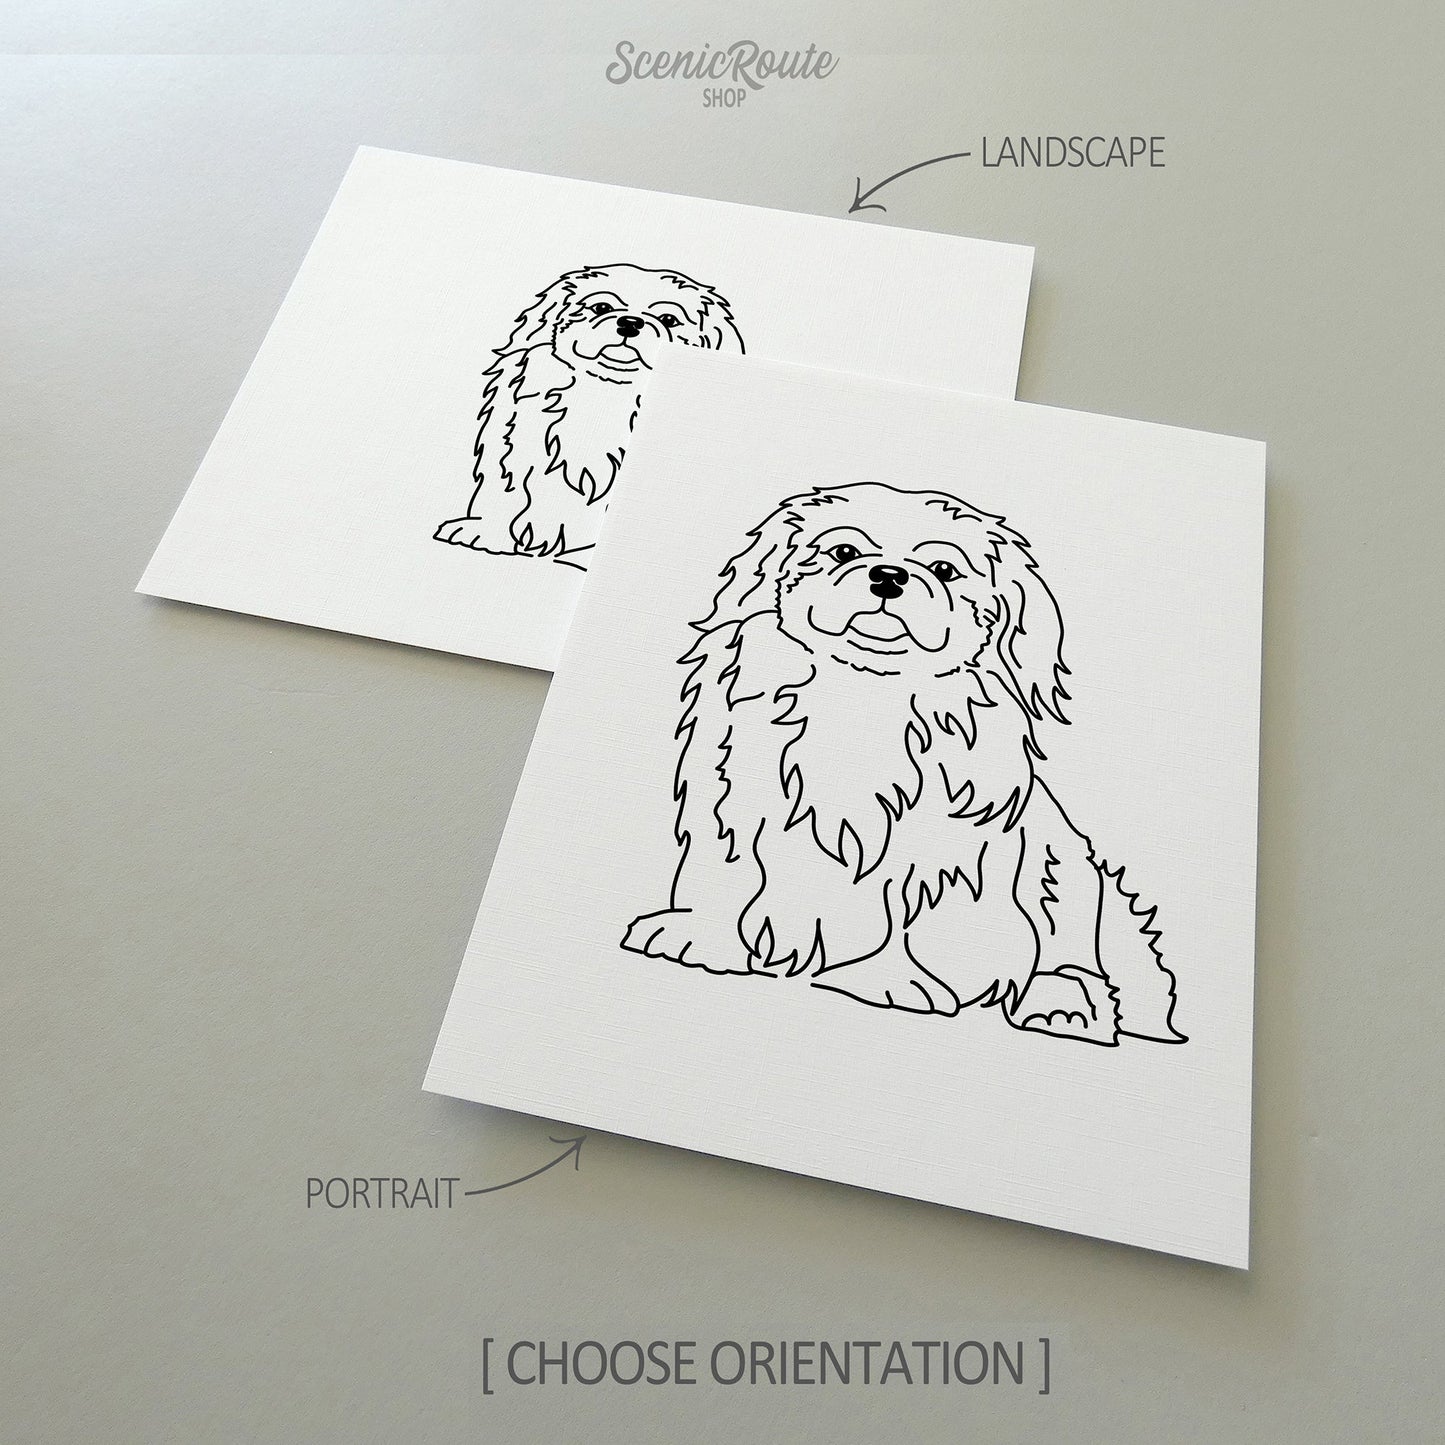 Two line art drawings of a Pekingese dog on white linen paper with a gray background.  The pieces are shown in portrait and landscape orientation for the available art print options.